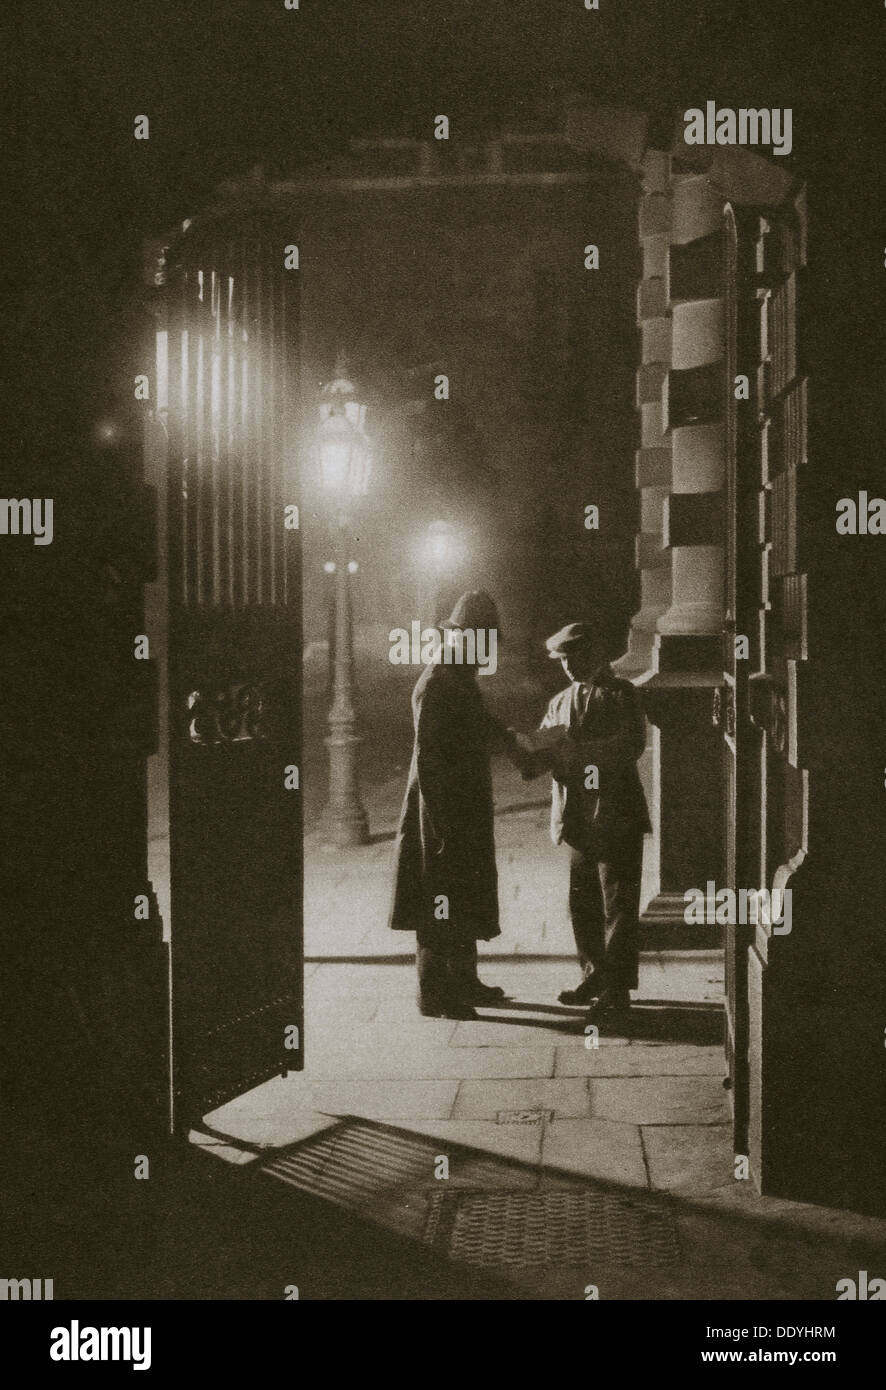 Scotland Yard in the early hours of the morning, the Embankment, London, 20th century. Artist: Unknown Stock Photo